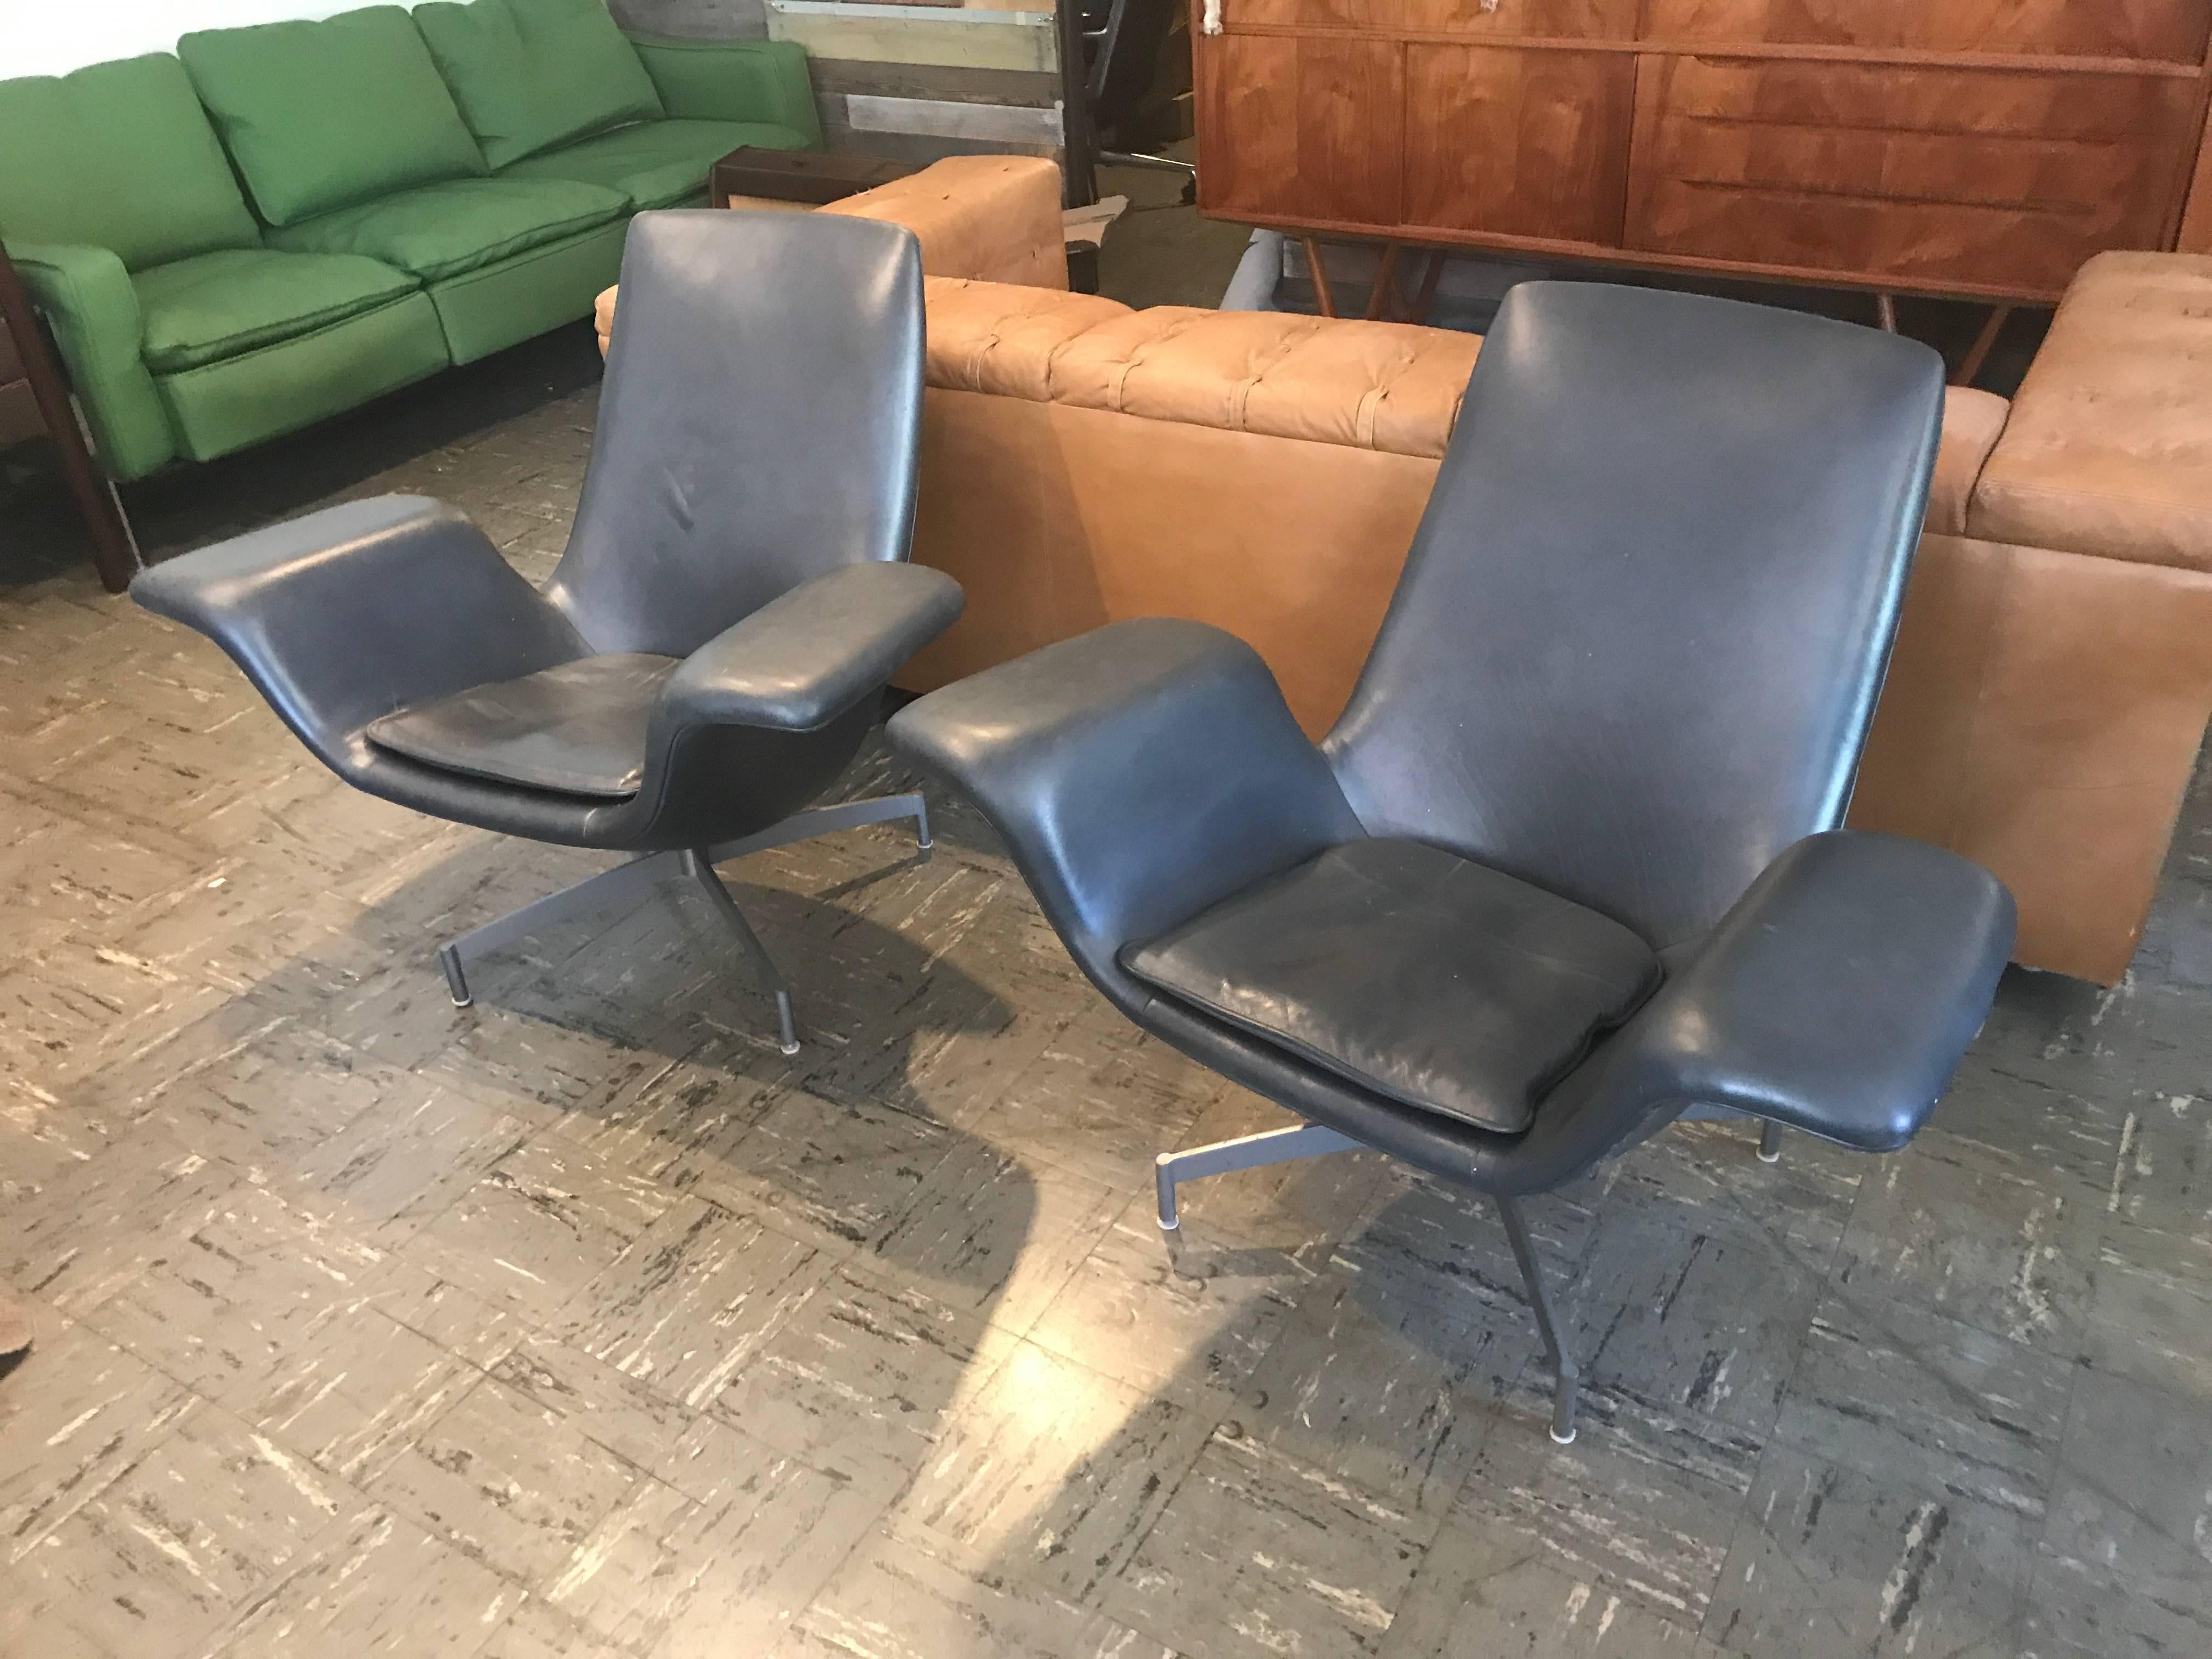 Great used condition
Extremely solid and beautifully designed chairs 
Also very comfortable.
 